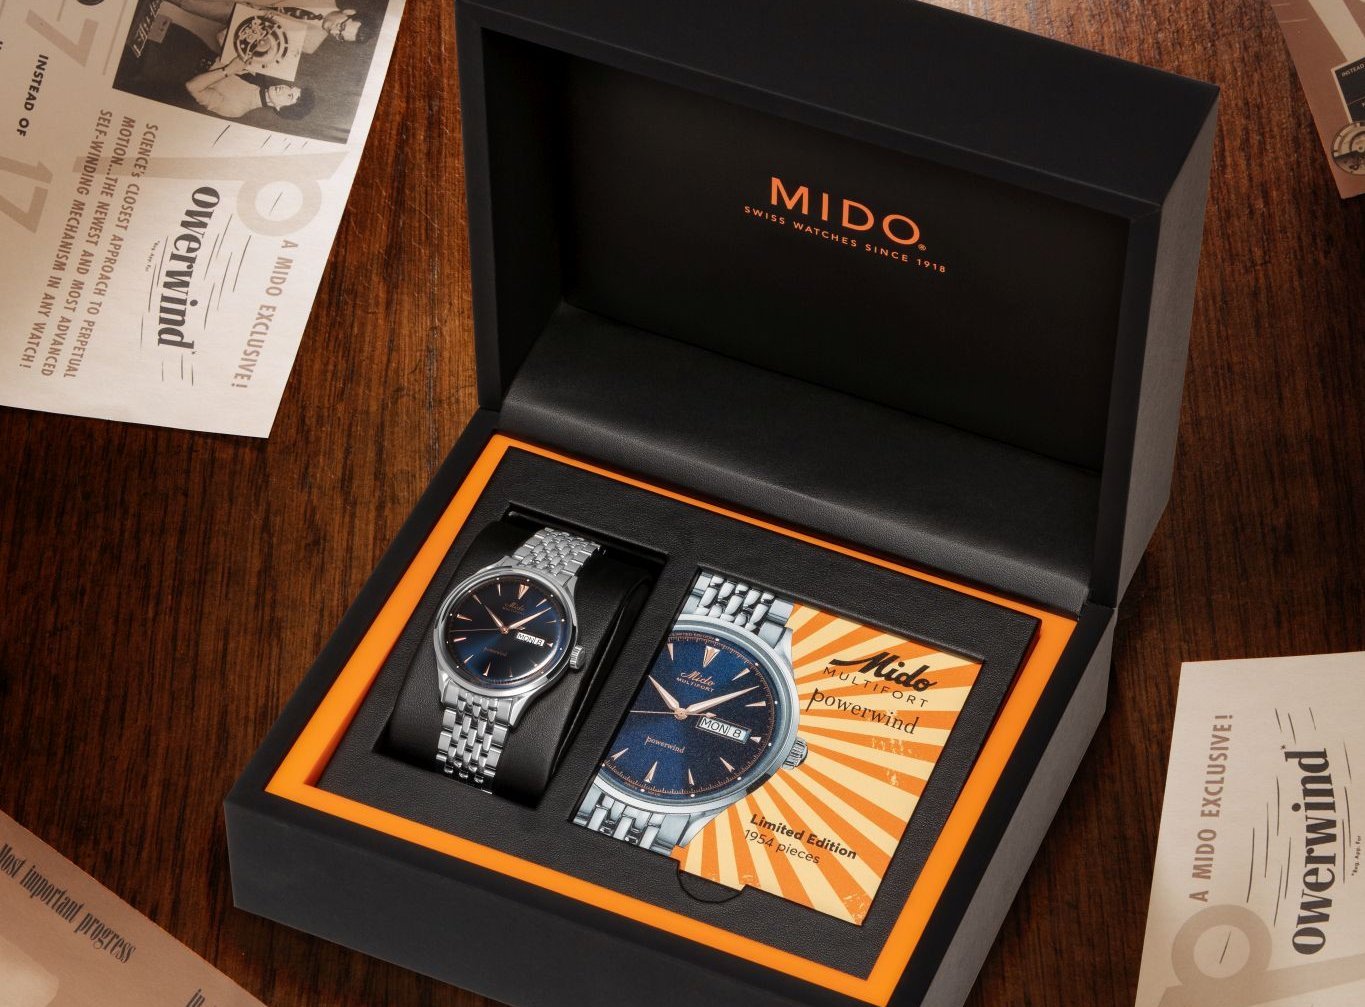 Mido launches the Multifort Powerwind Chronometer 